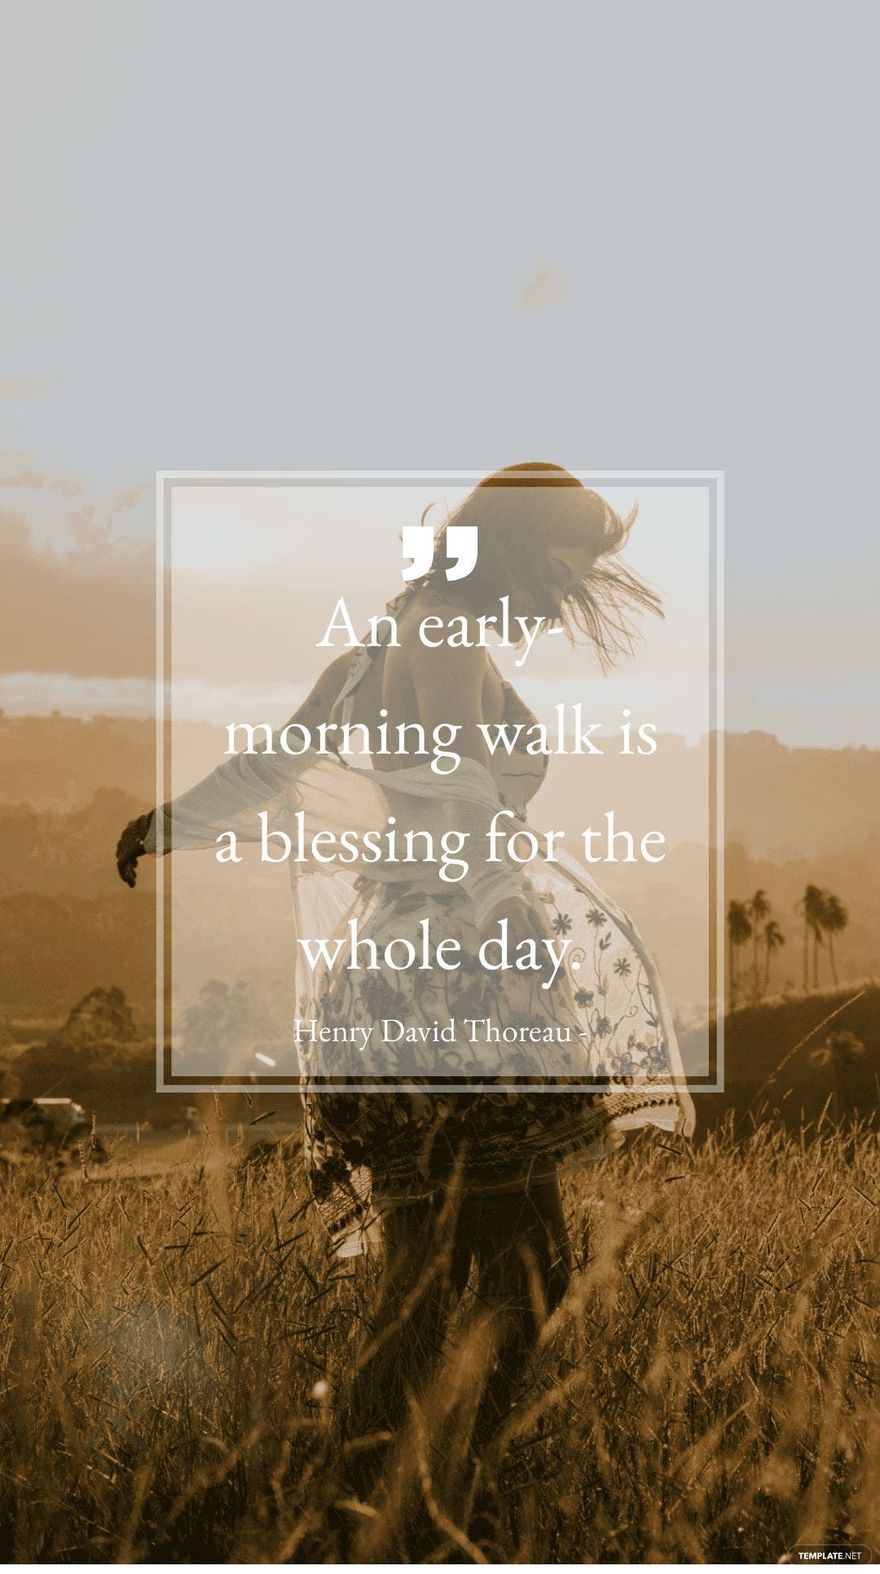 Henry David Thoreau - An early-morning walk is a blessing for the whole day.